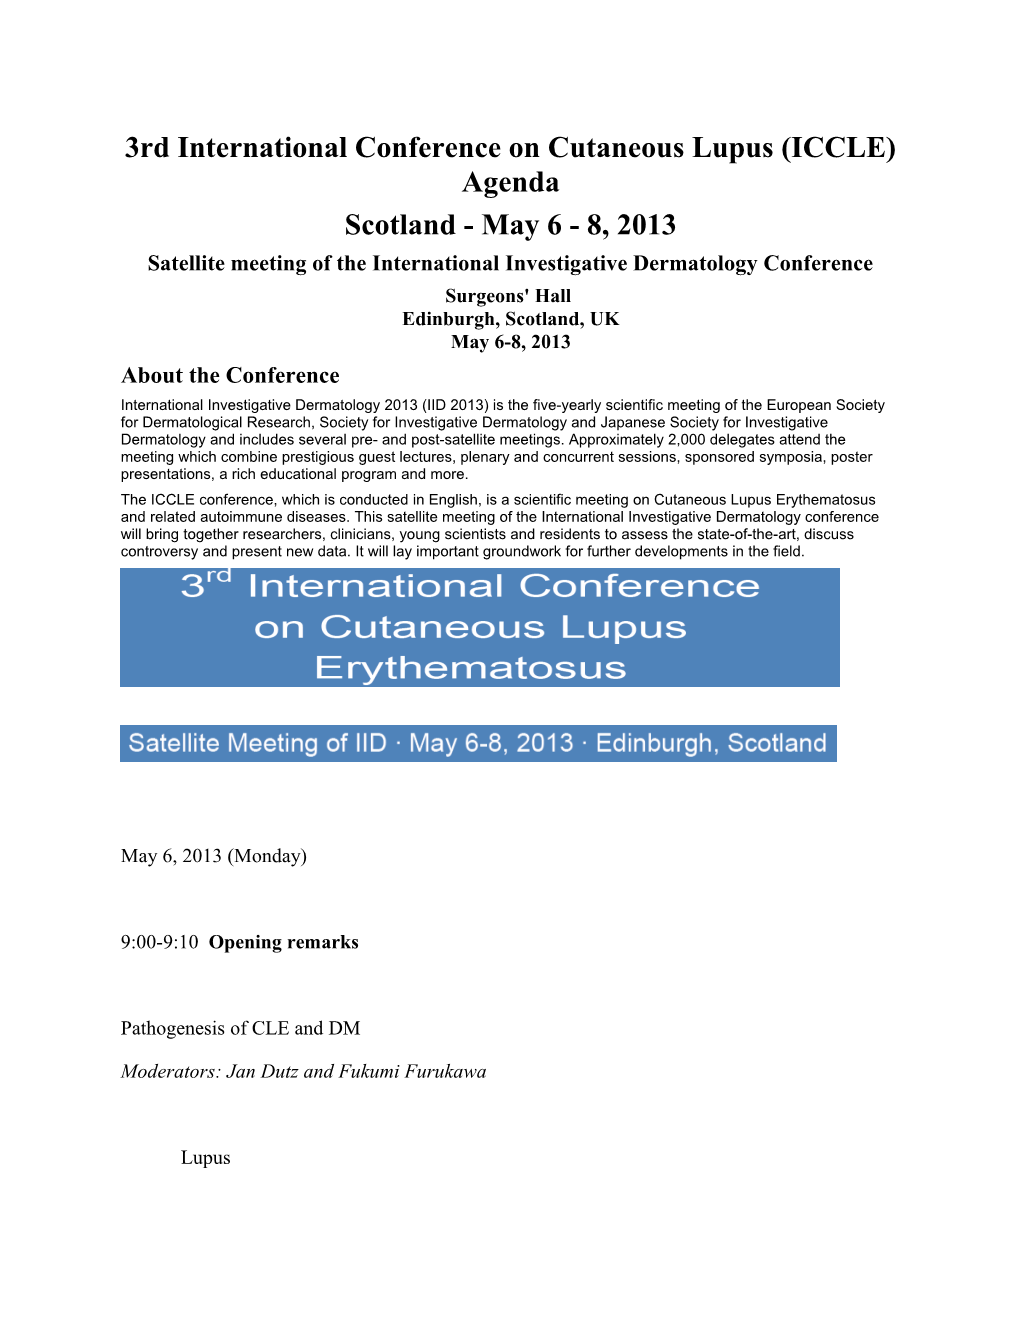 3Rd International Conference on Cutaneous Lupus (ICCLE) Agenda